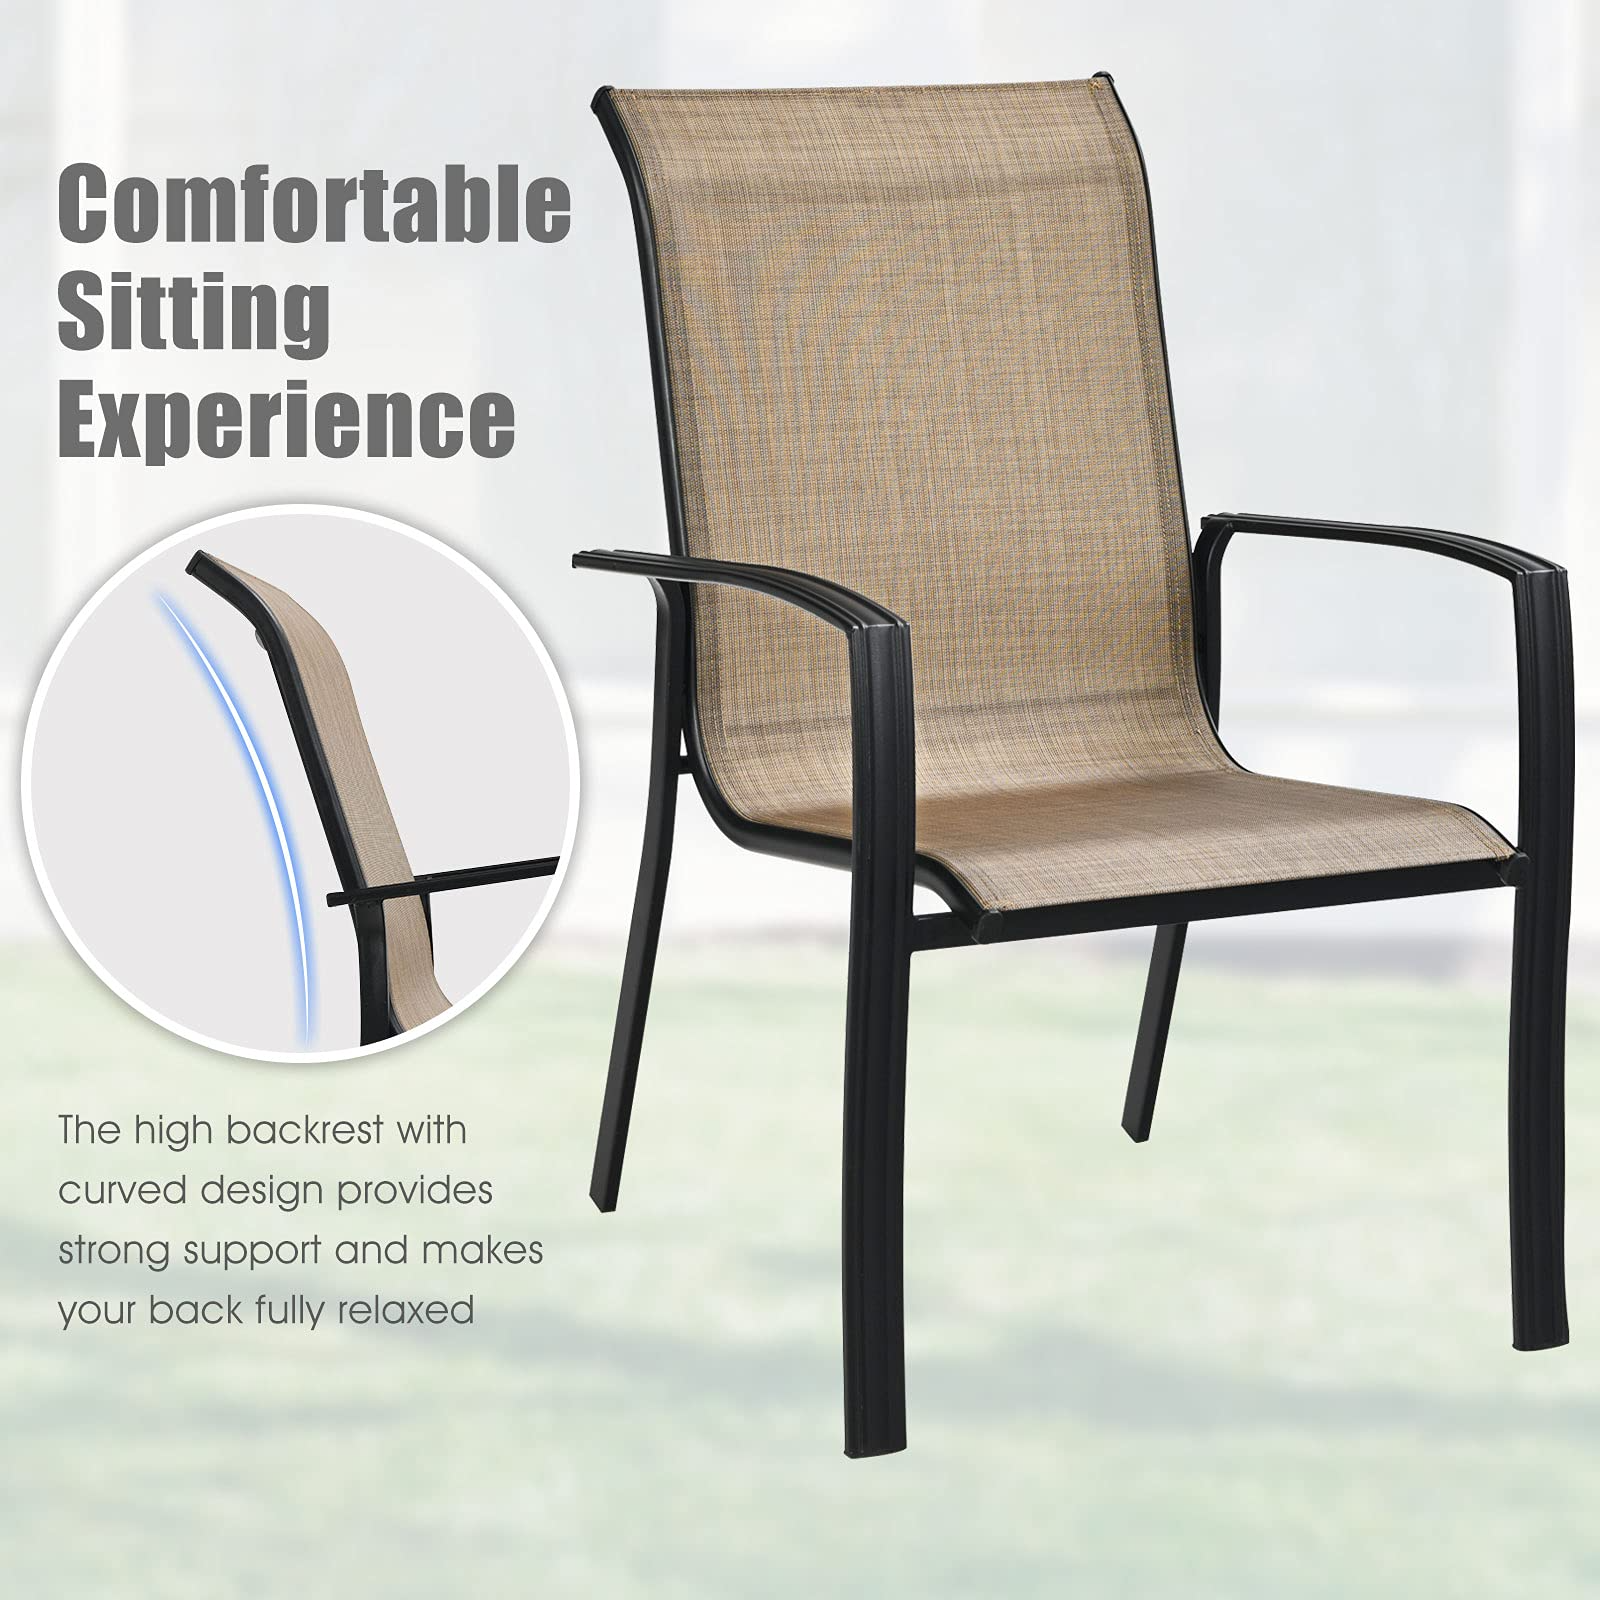 Giantex Metal Camping Chairs with High Backrest Armrest for Porch Deck Pool Beach Yard